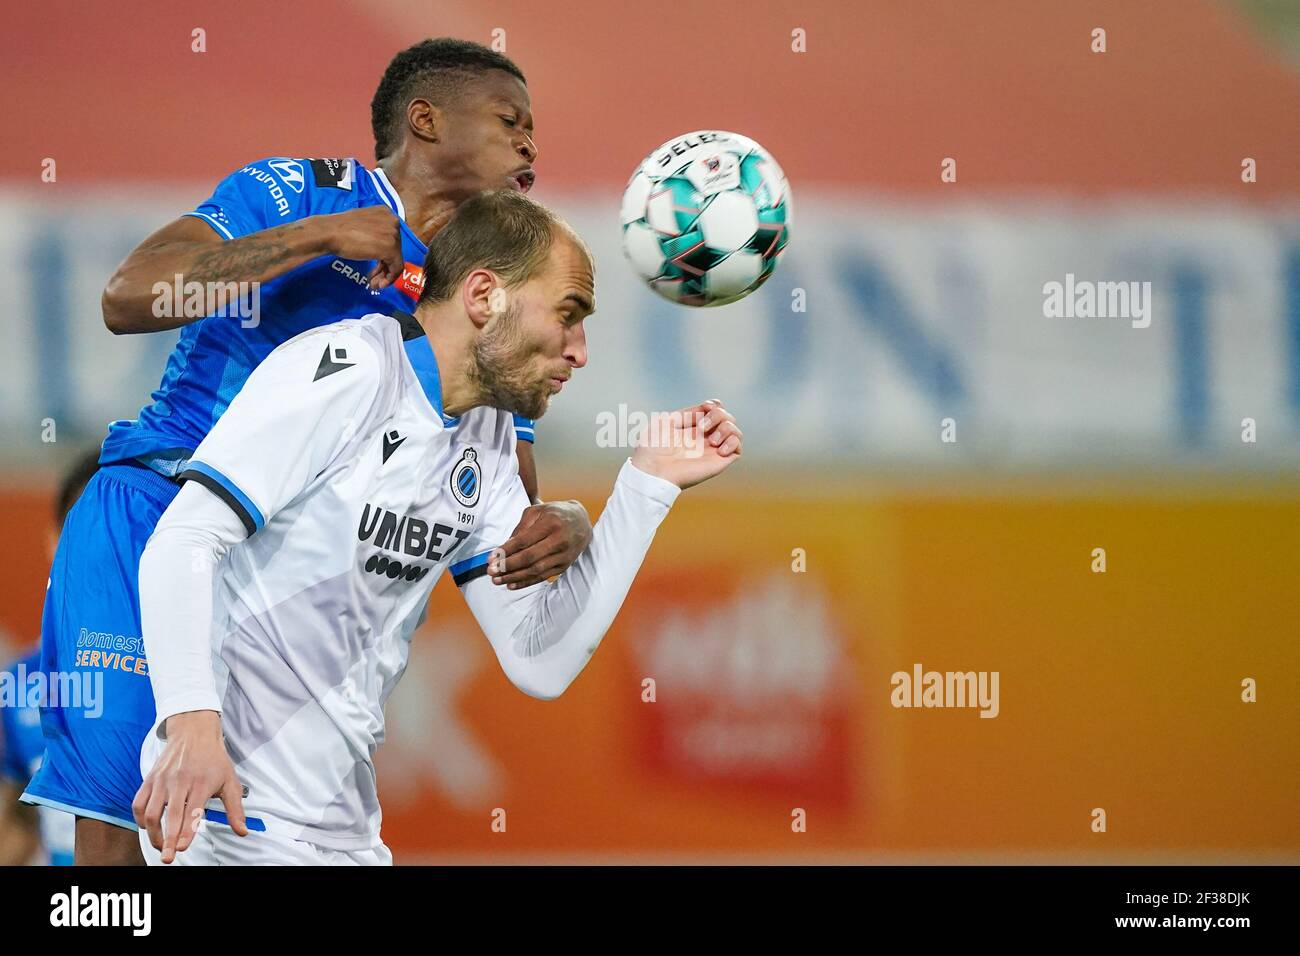 Gent Belgium March 15 Nurio Fortuna Of Kaa Gent And Bas Dost Of Club Brugge During The Jupiler Pro League Match Between Kaa Gent And Club Brugge K Stock Photo Alamy